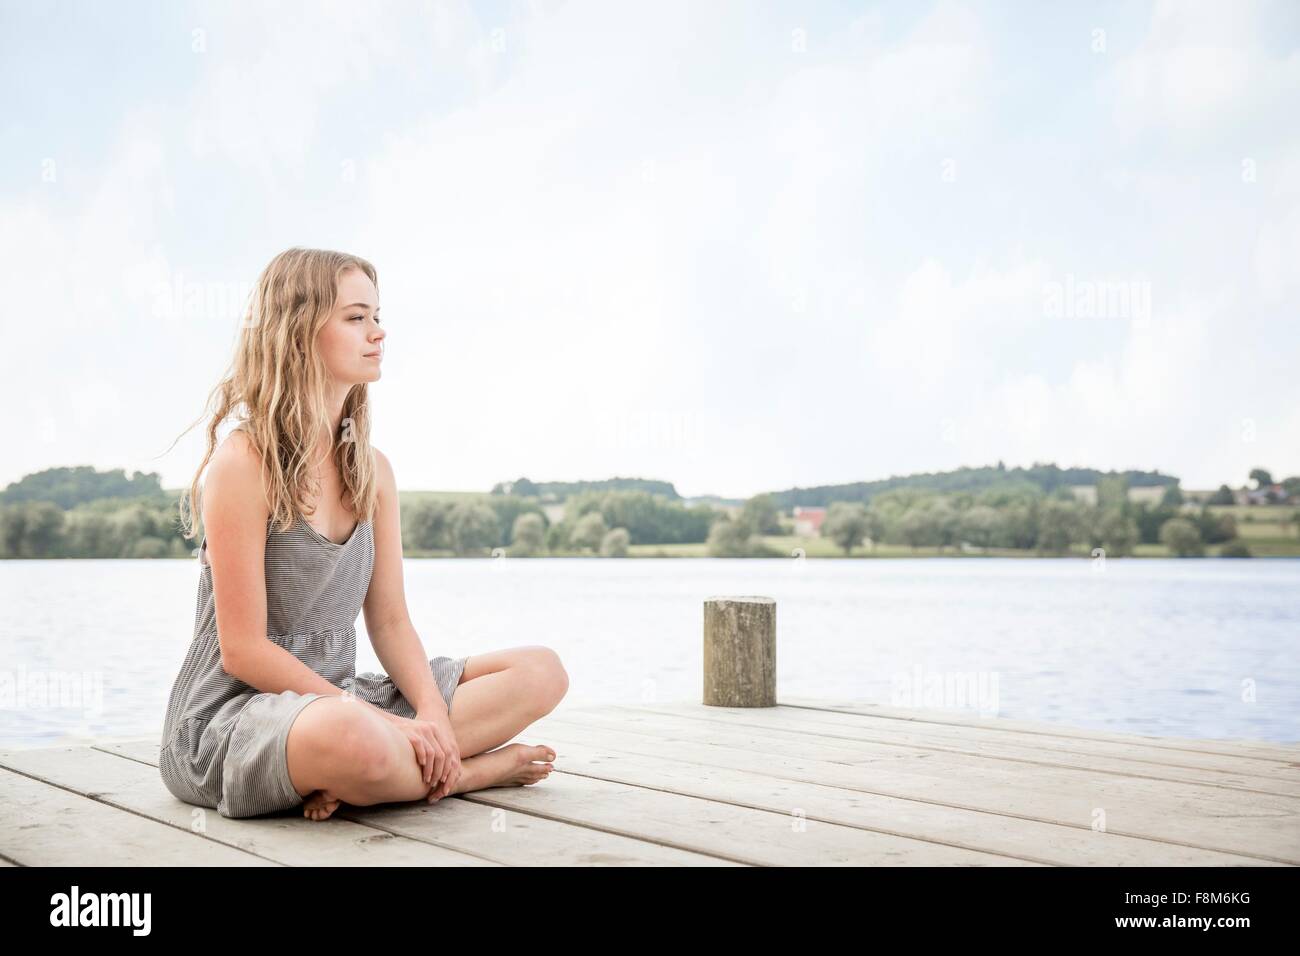 Portrait of young woman sitting on jetty, crossed legs Stock Photo